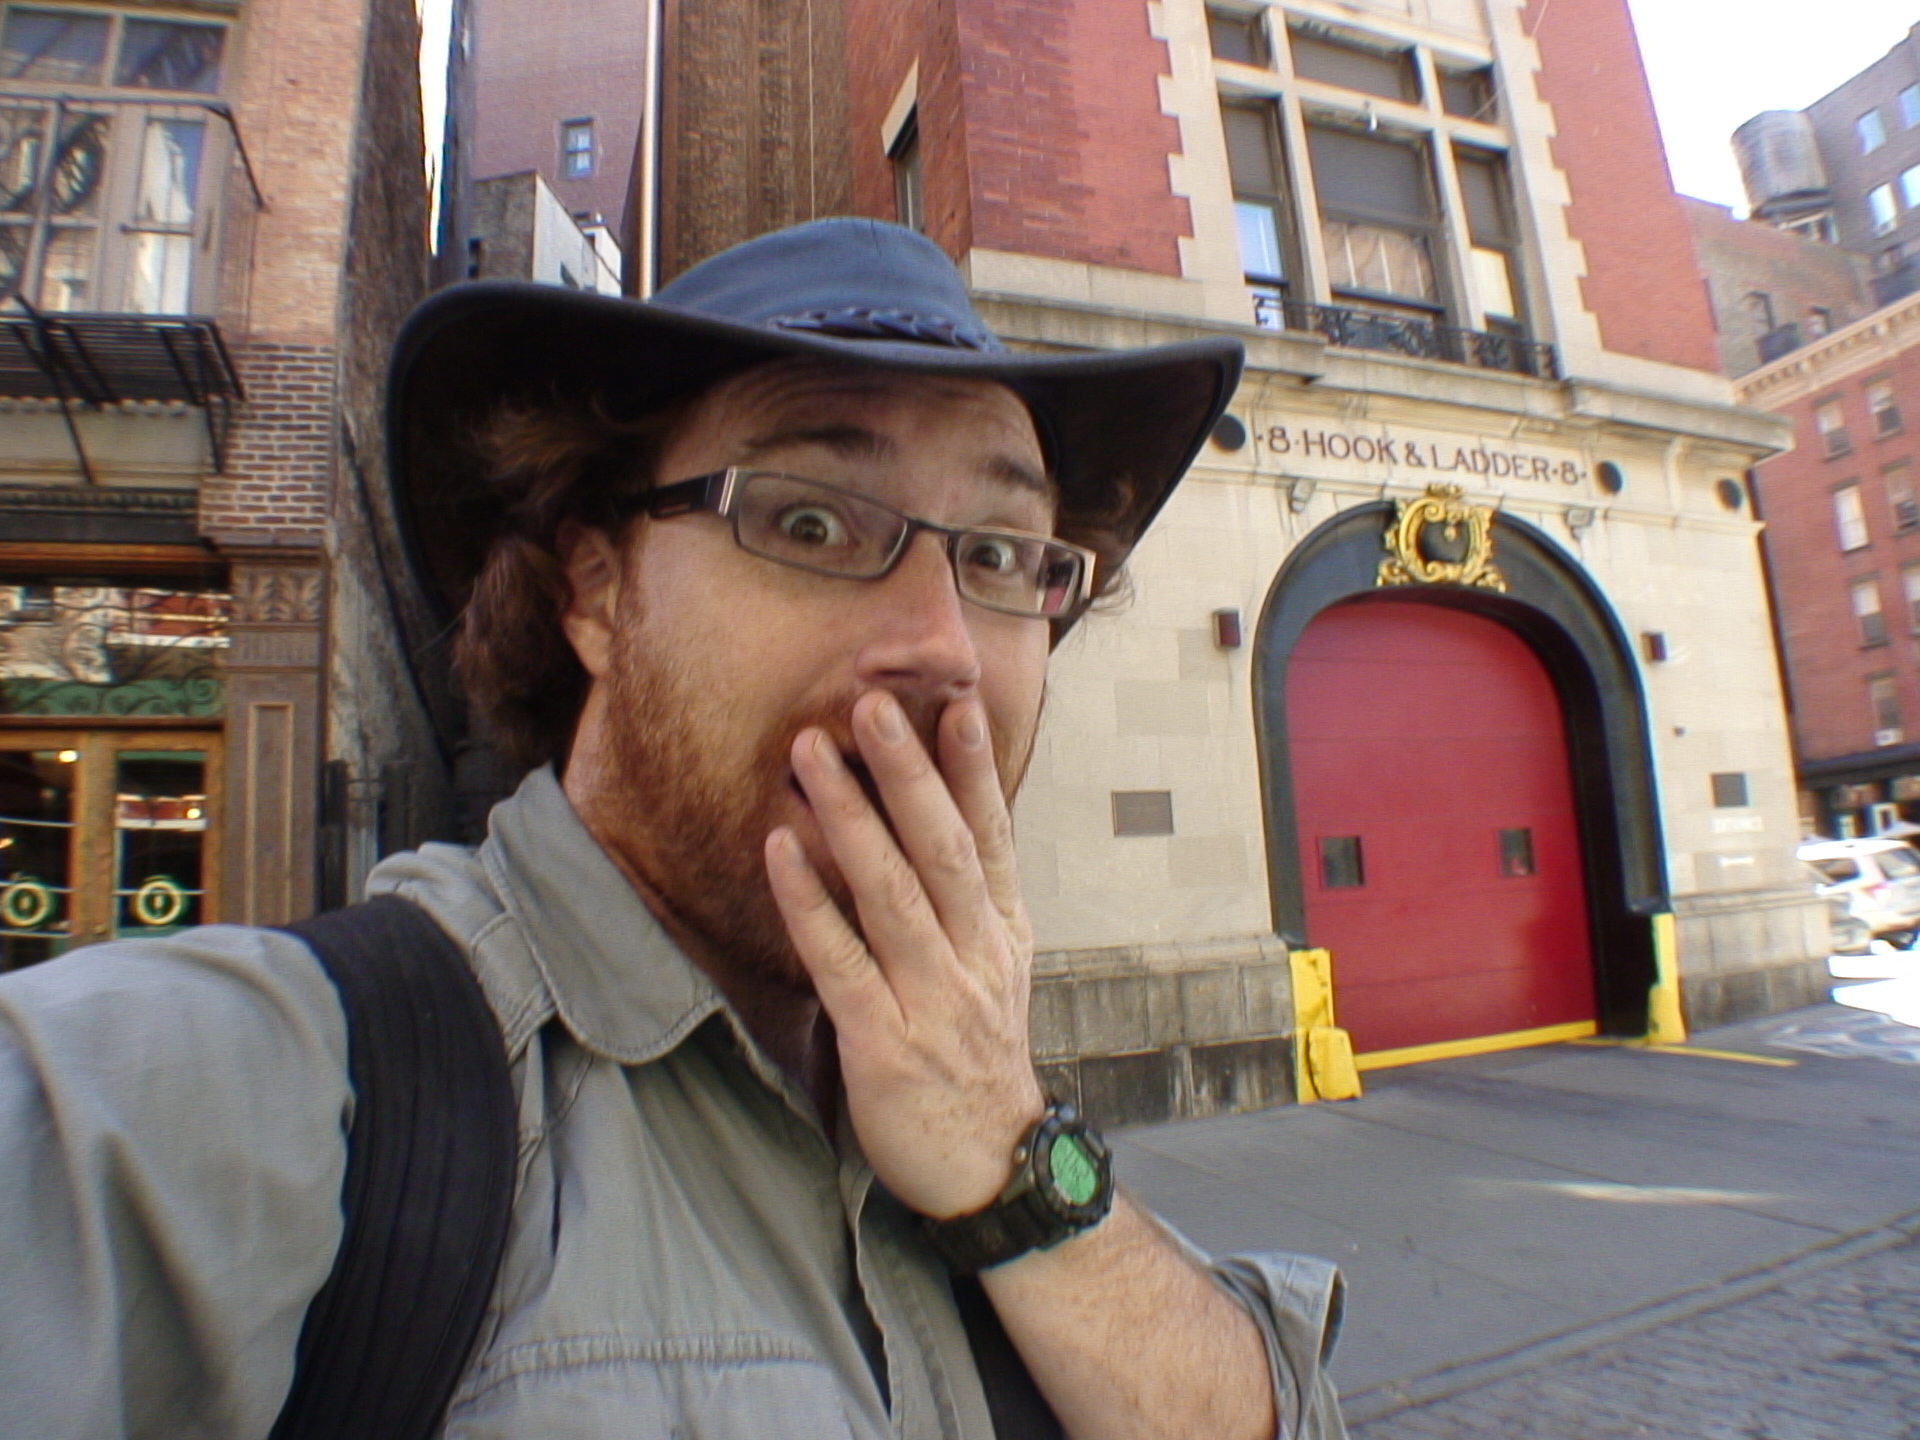 You are currently viewing Graham’s Ghostbusters Tour of New York